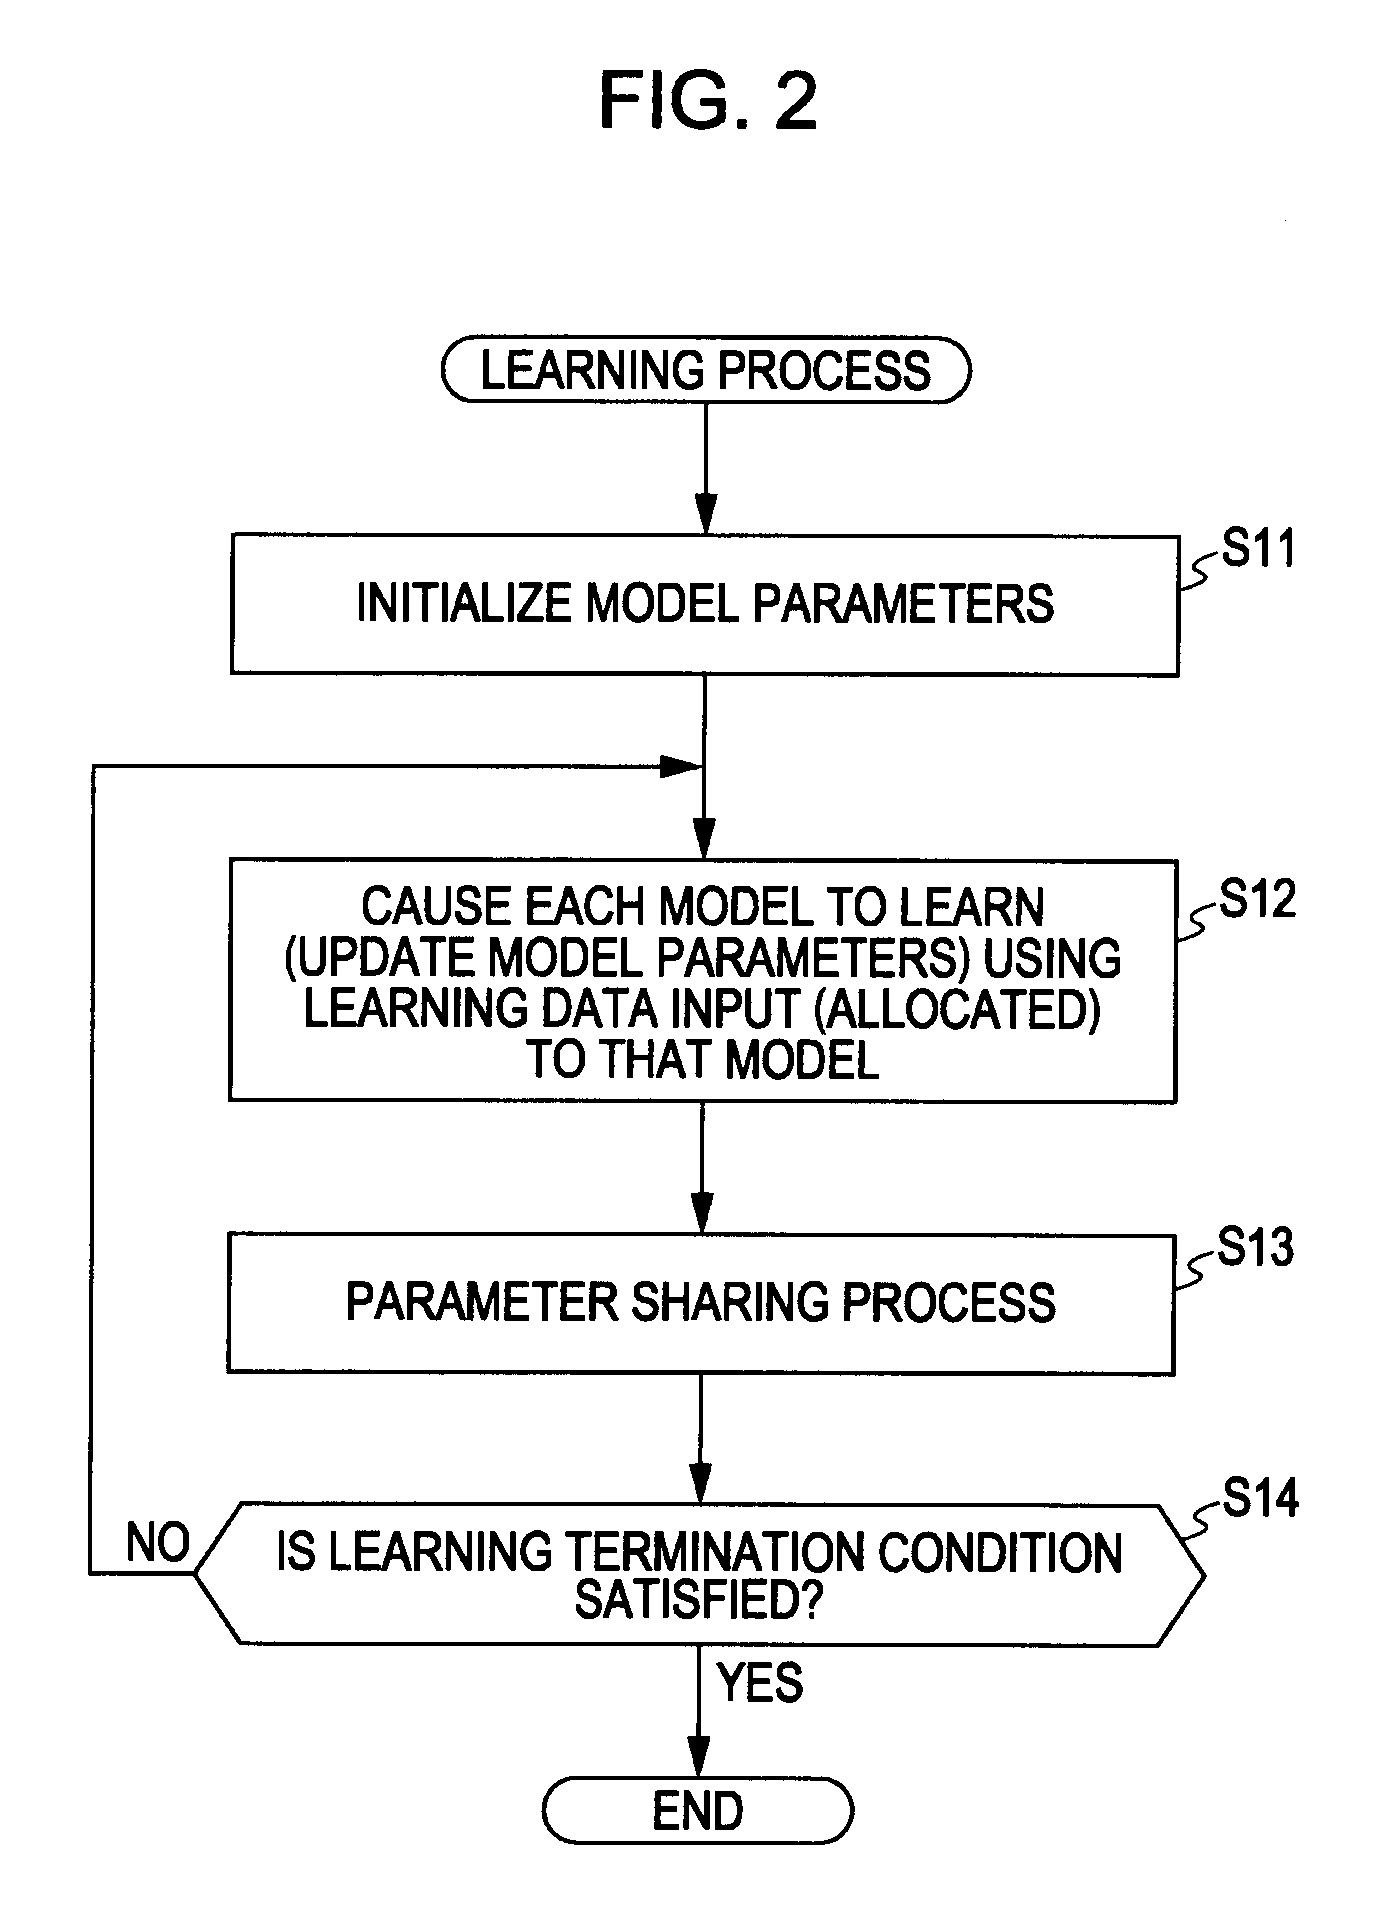 Learning device, learning method, and program for learning a pattern